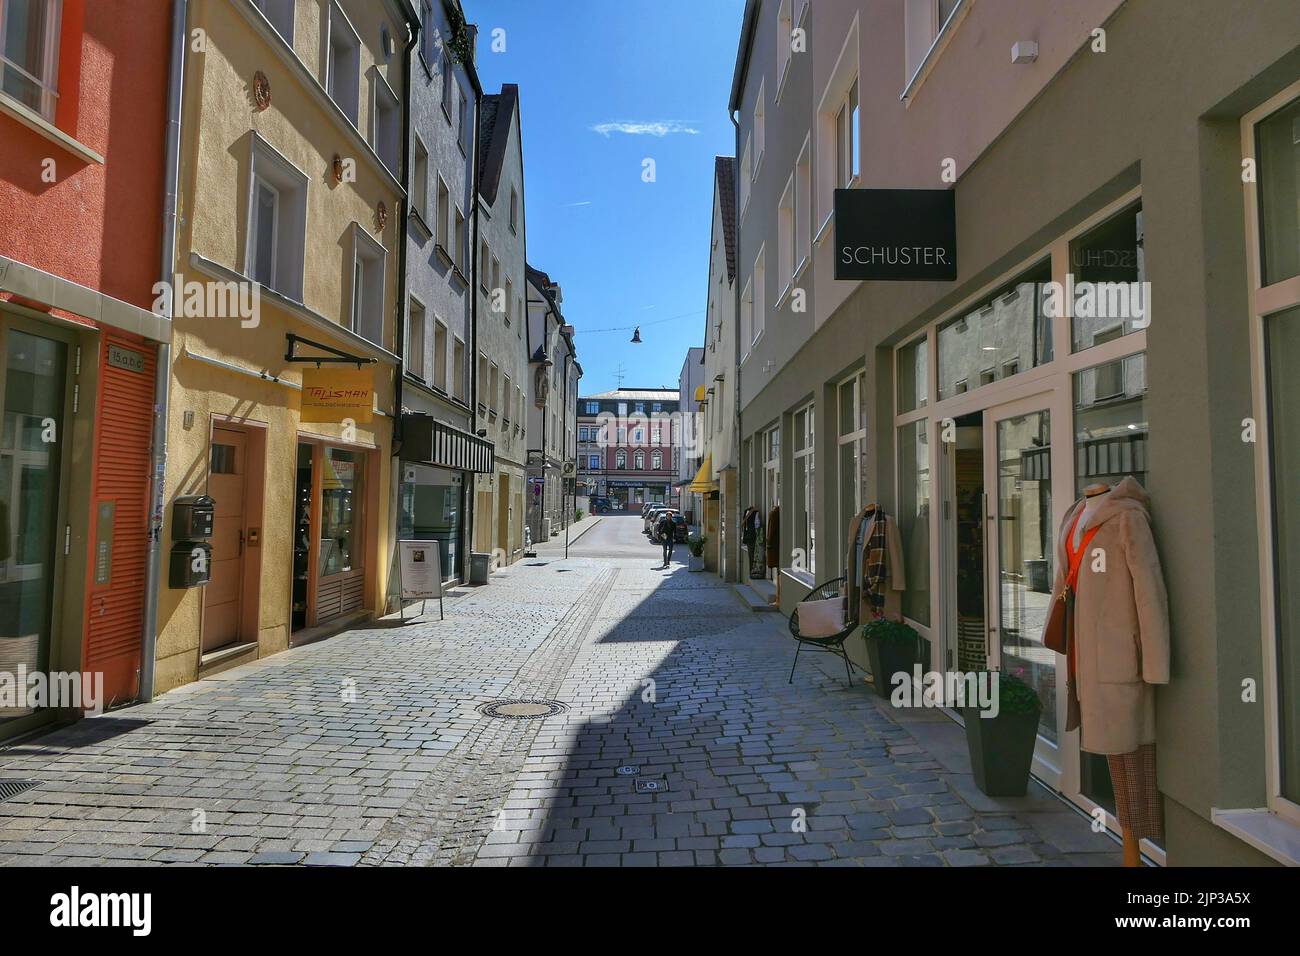 Picture shows city and streetphotography while walking through Straubing in Bavaria, Germany Stock Photo